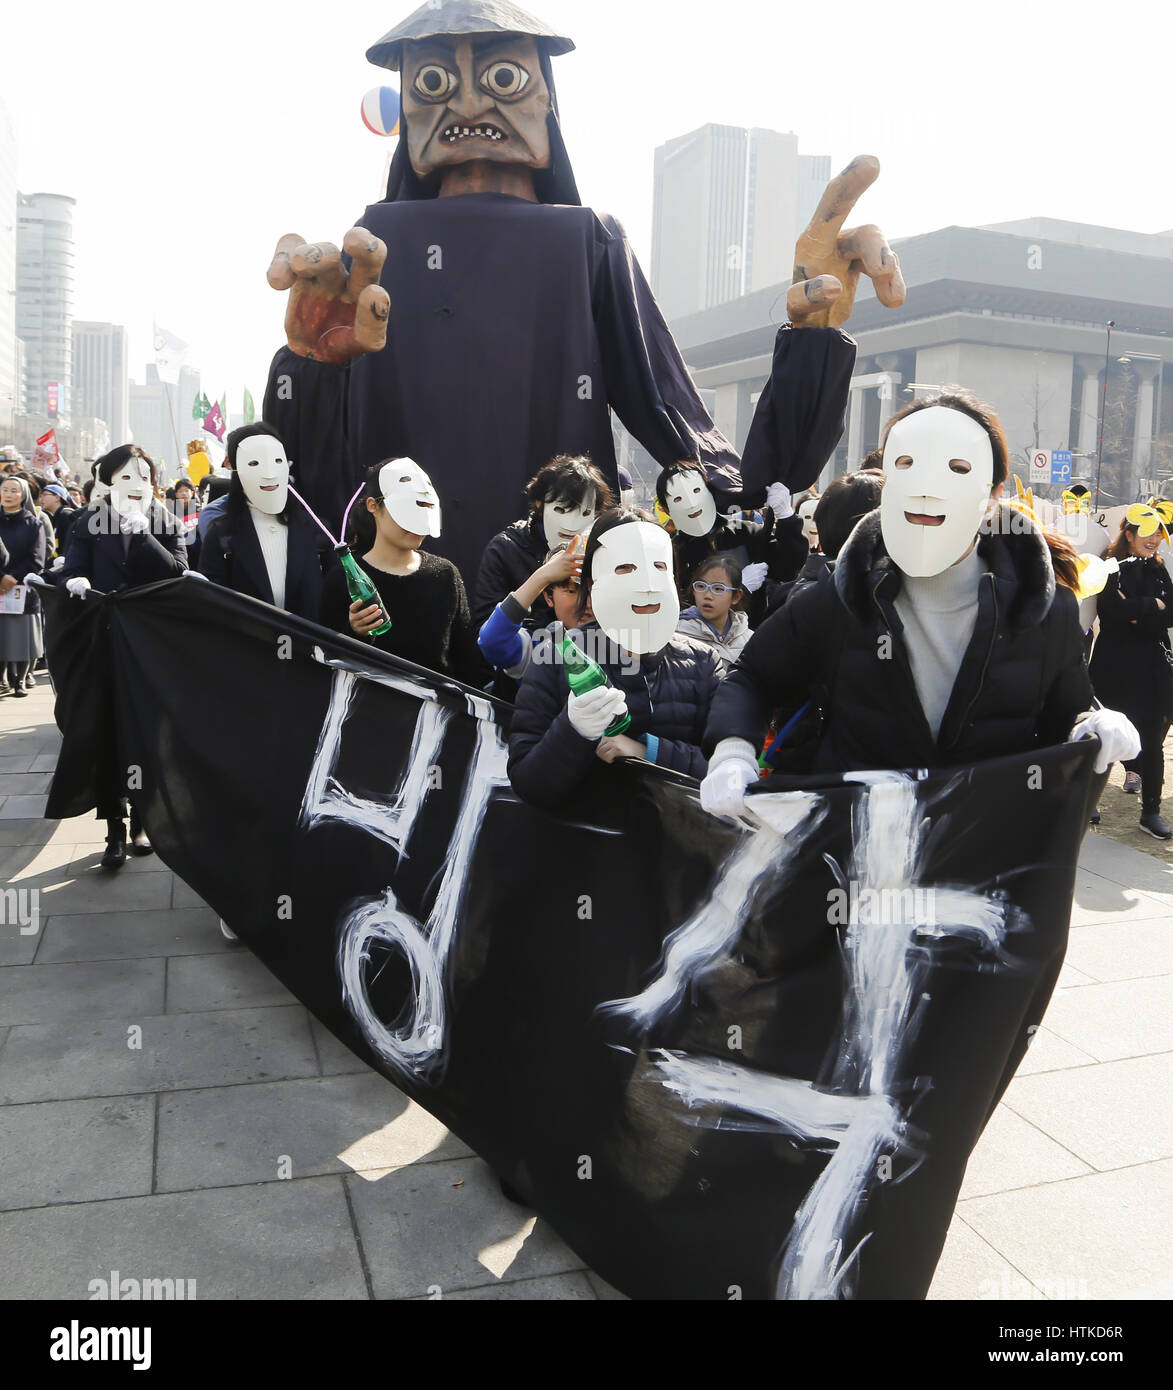 The sixth anniversary of the 2011 Fukushima nuclear disaster, Mar 11, 2017 : People attend a memorial rally marking the sixth anniversary of the 2011 Fukushima nuclear disaster in Seoul, South Korea. The March 11, 2011 earthquake and tsunami killed more than 18,000 people in Japan. Participants demanded the government to stop nuclear project and establish more solar energy generation during a rally which was held also as a part of mass rally held to celebrate after the Constitutional Court on Friday upheld the impeachment of President Park Geun-hye. Korean characters on the placard read,'Obliv Stock Photo